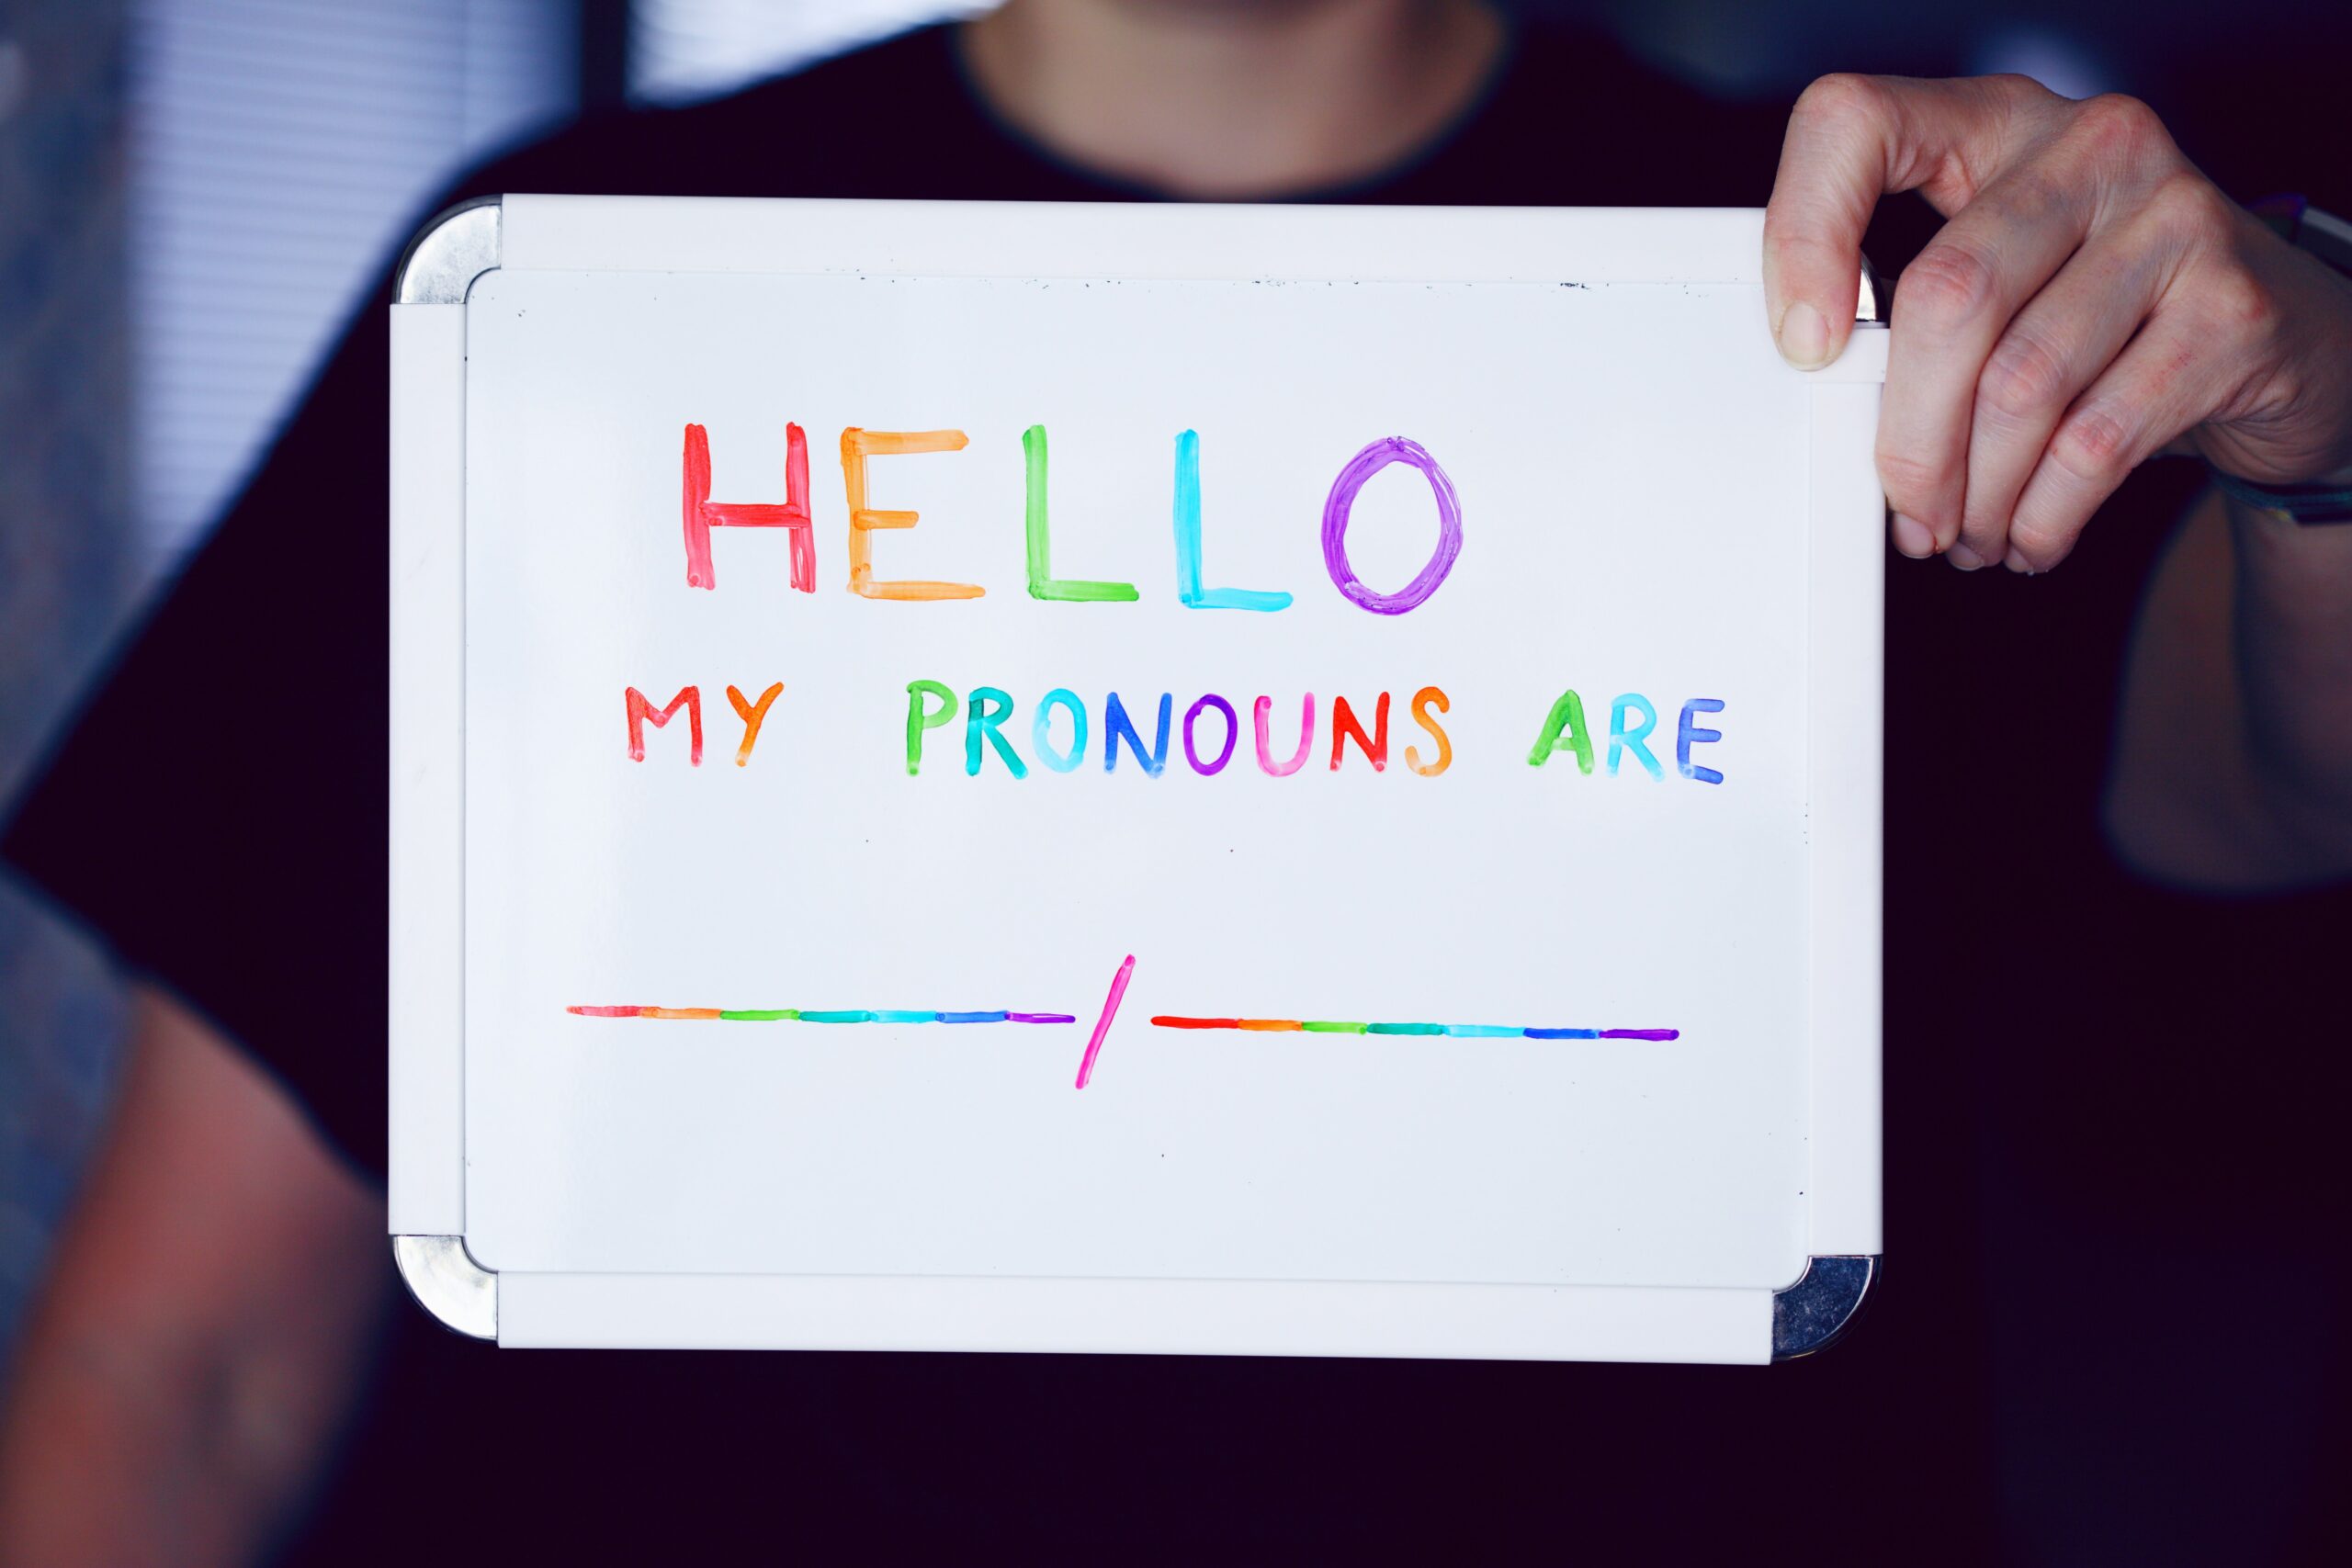 Ted Dabrowski on What Promises to be the “Pronoun Event” of the Season in Wilmette